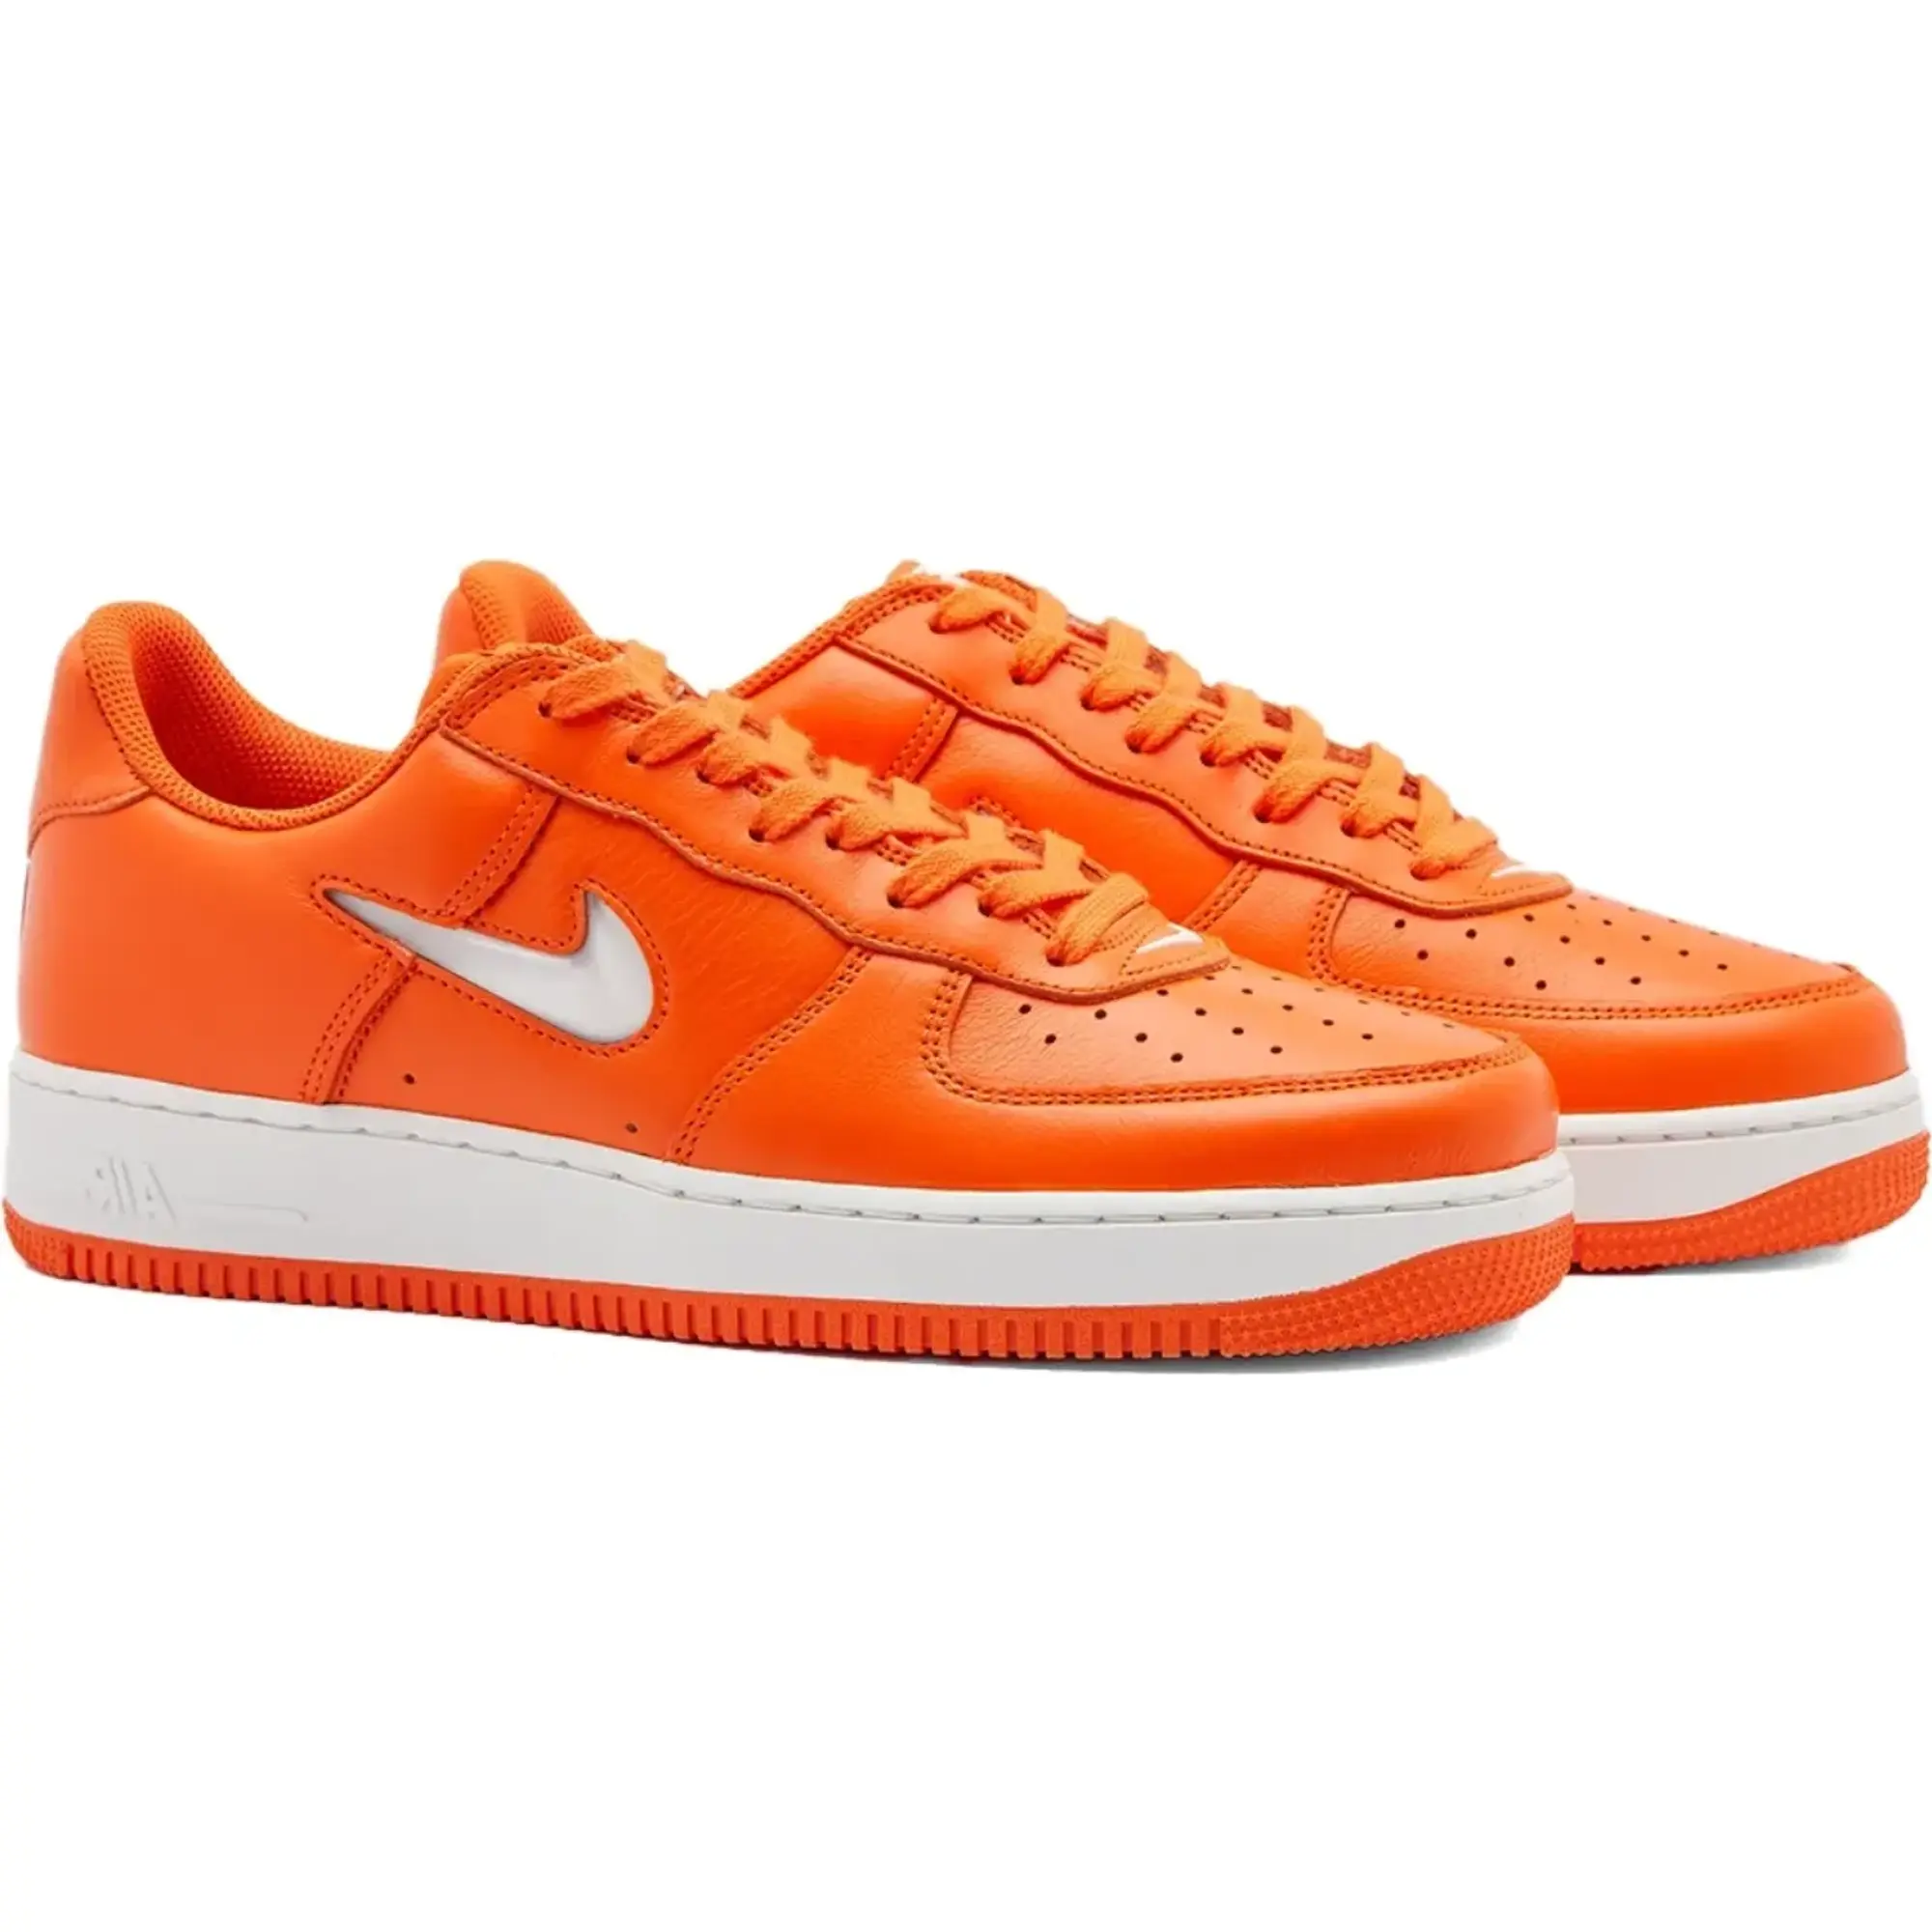 Nike Air Force 1 Low 40th Anniversary Edition Orange Jewel Shoes